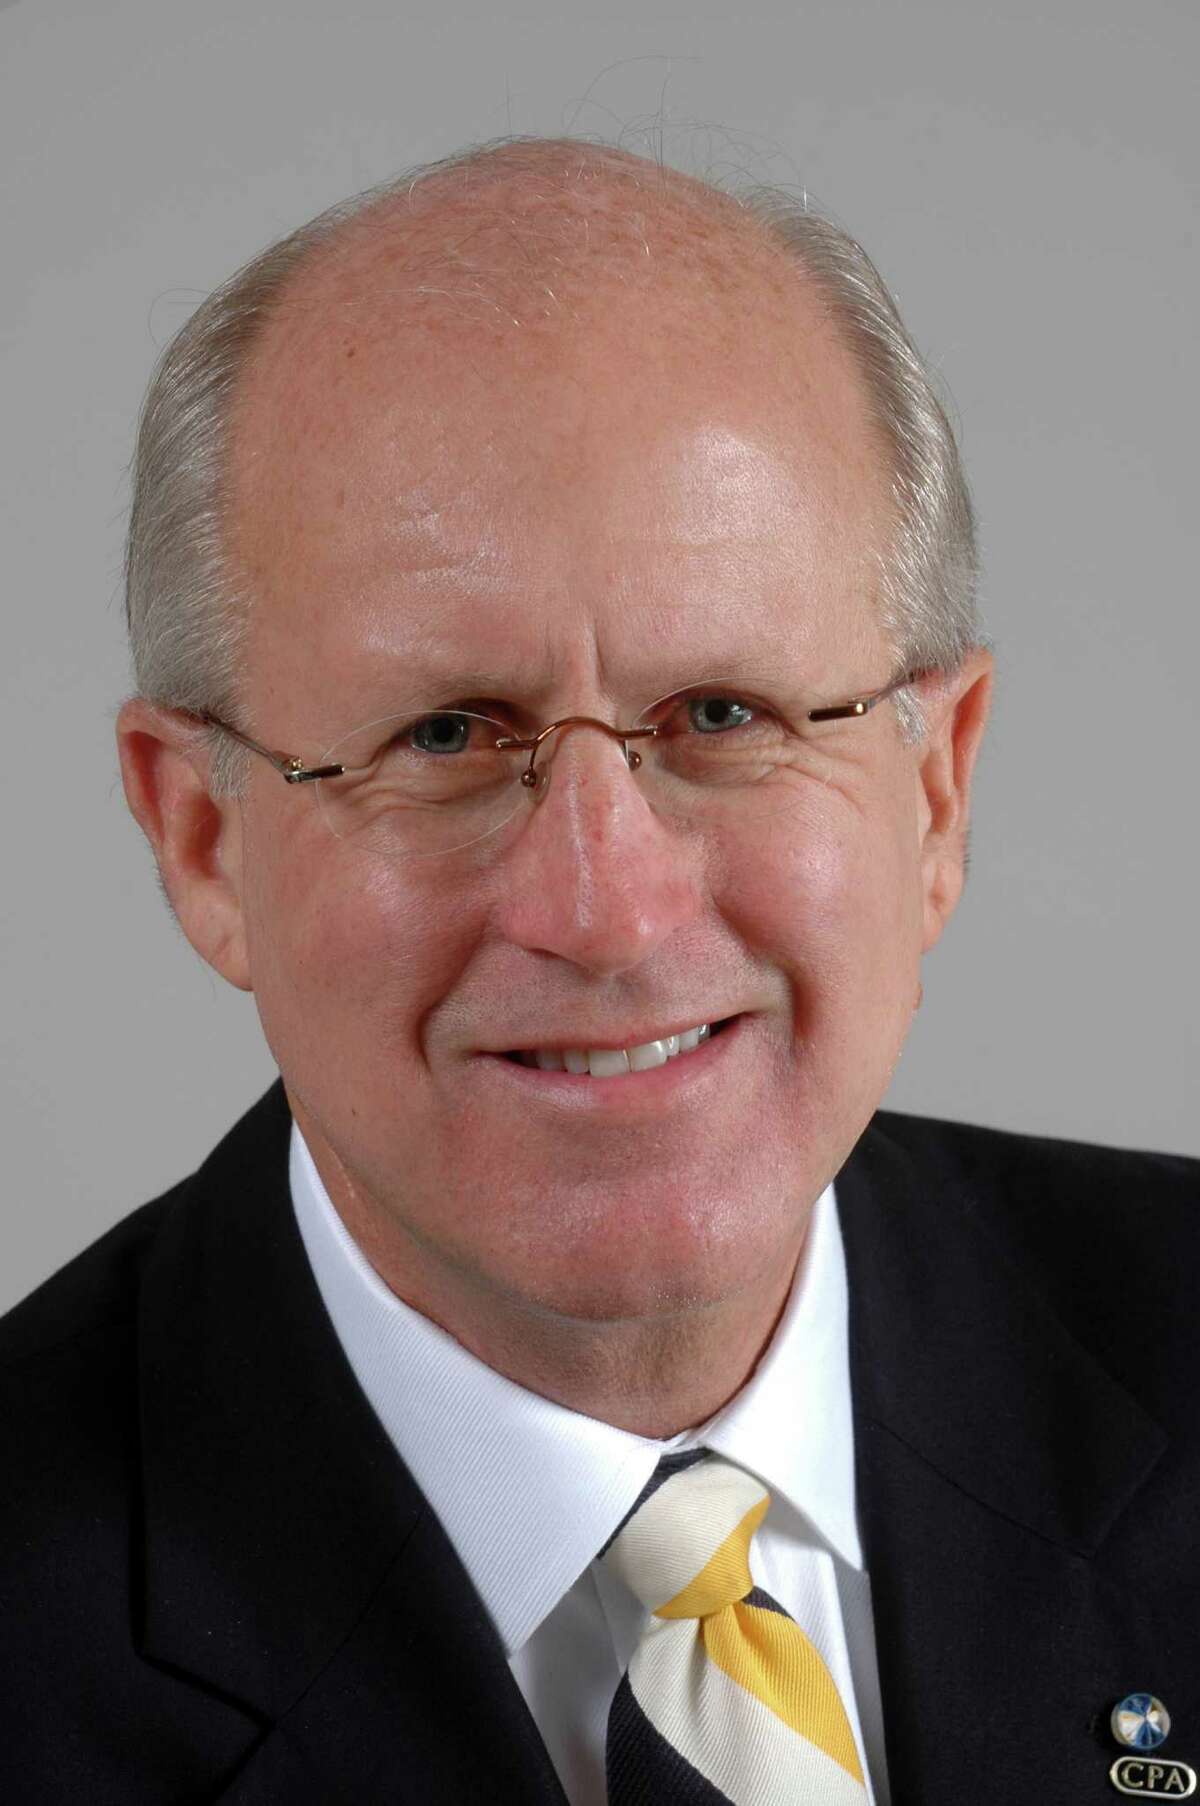 David Walker, Republican candidate for Lieutenant Governor of Connecticut.